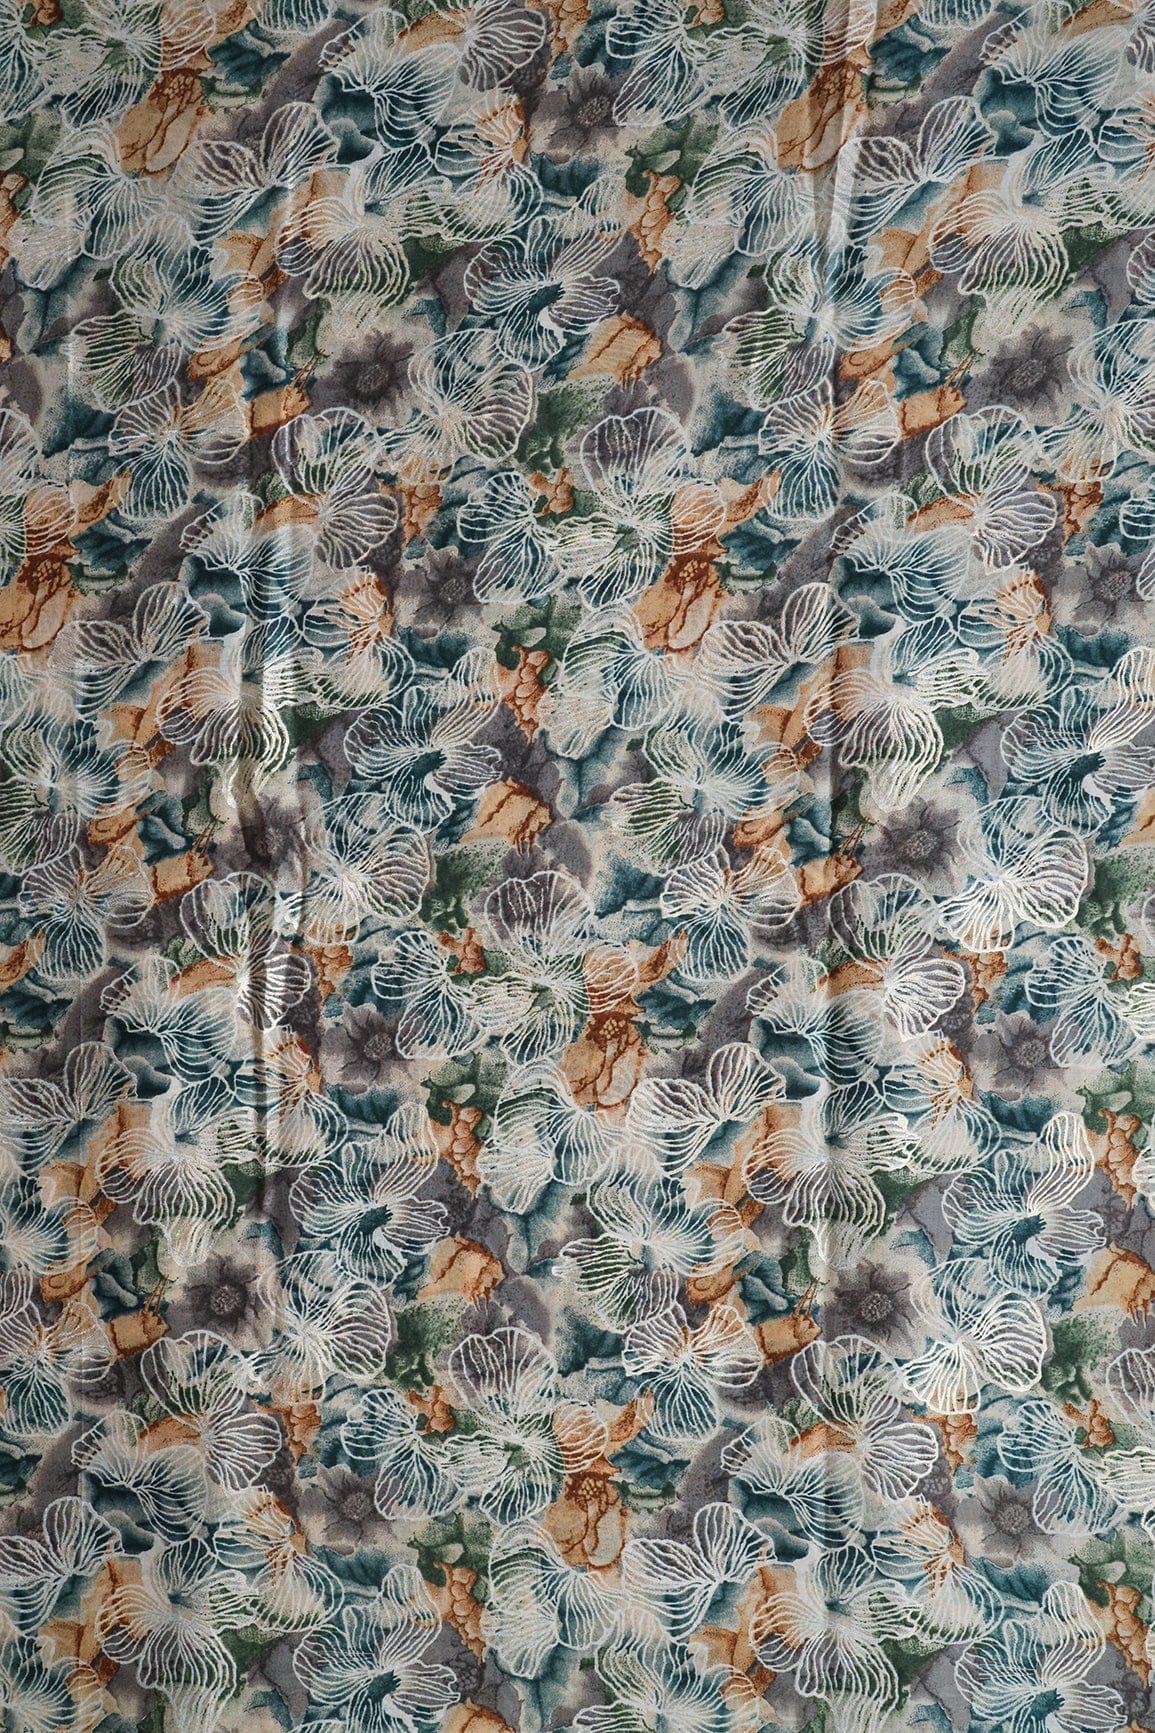 doeraa Prints Bottle Green And Beige Floral Foil Print On Pure Mul Cotton Fabric